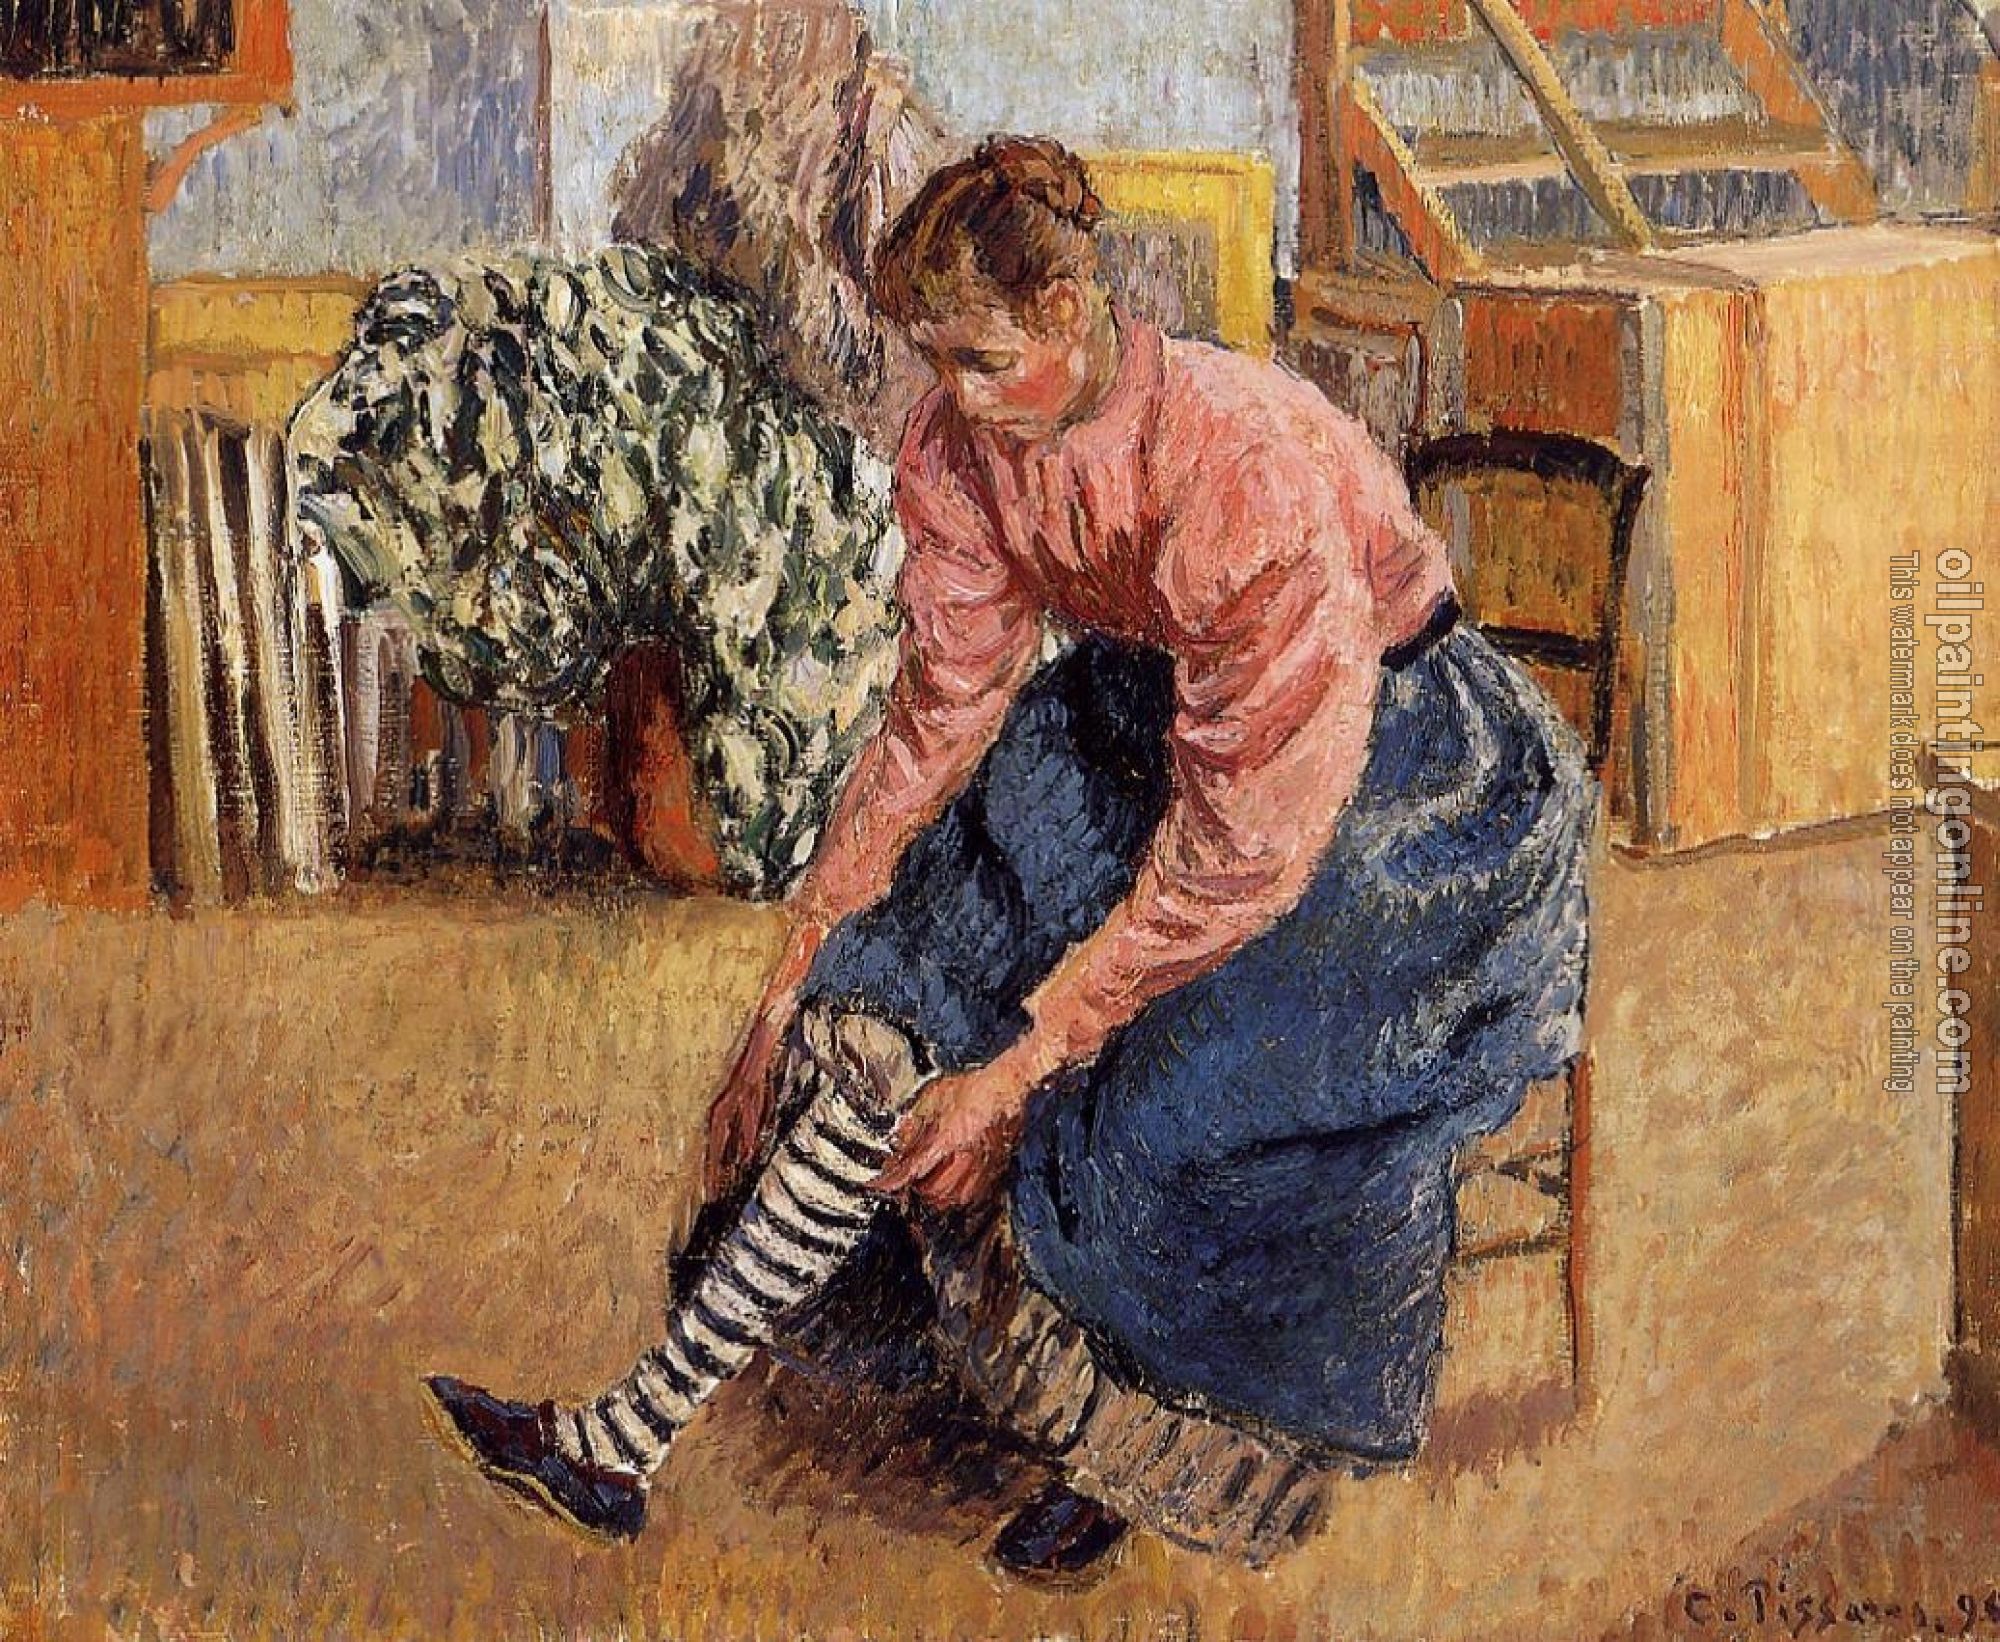 Pissarro, Camille - Woman Putting on Her Stockings